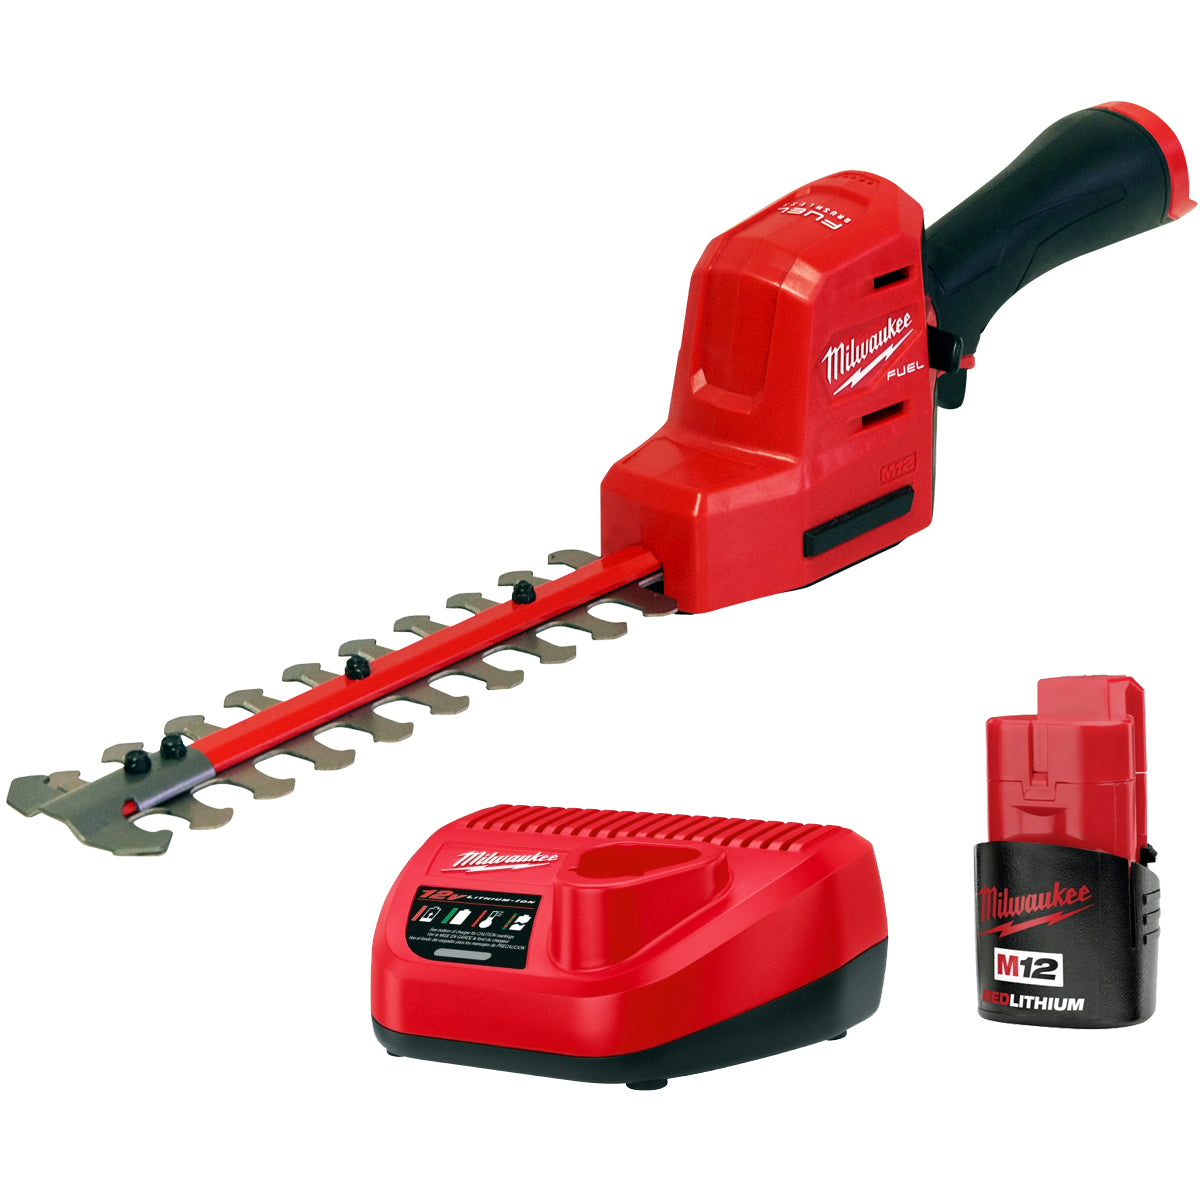 Milwaukee M12 FHT20-0 12V 20cm Fuel Brushless Hedge Trimmer with 1 x 2.0Ah Battery & Charger